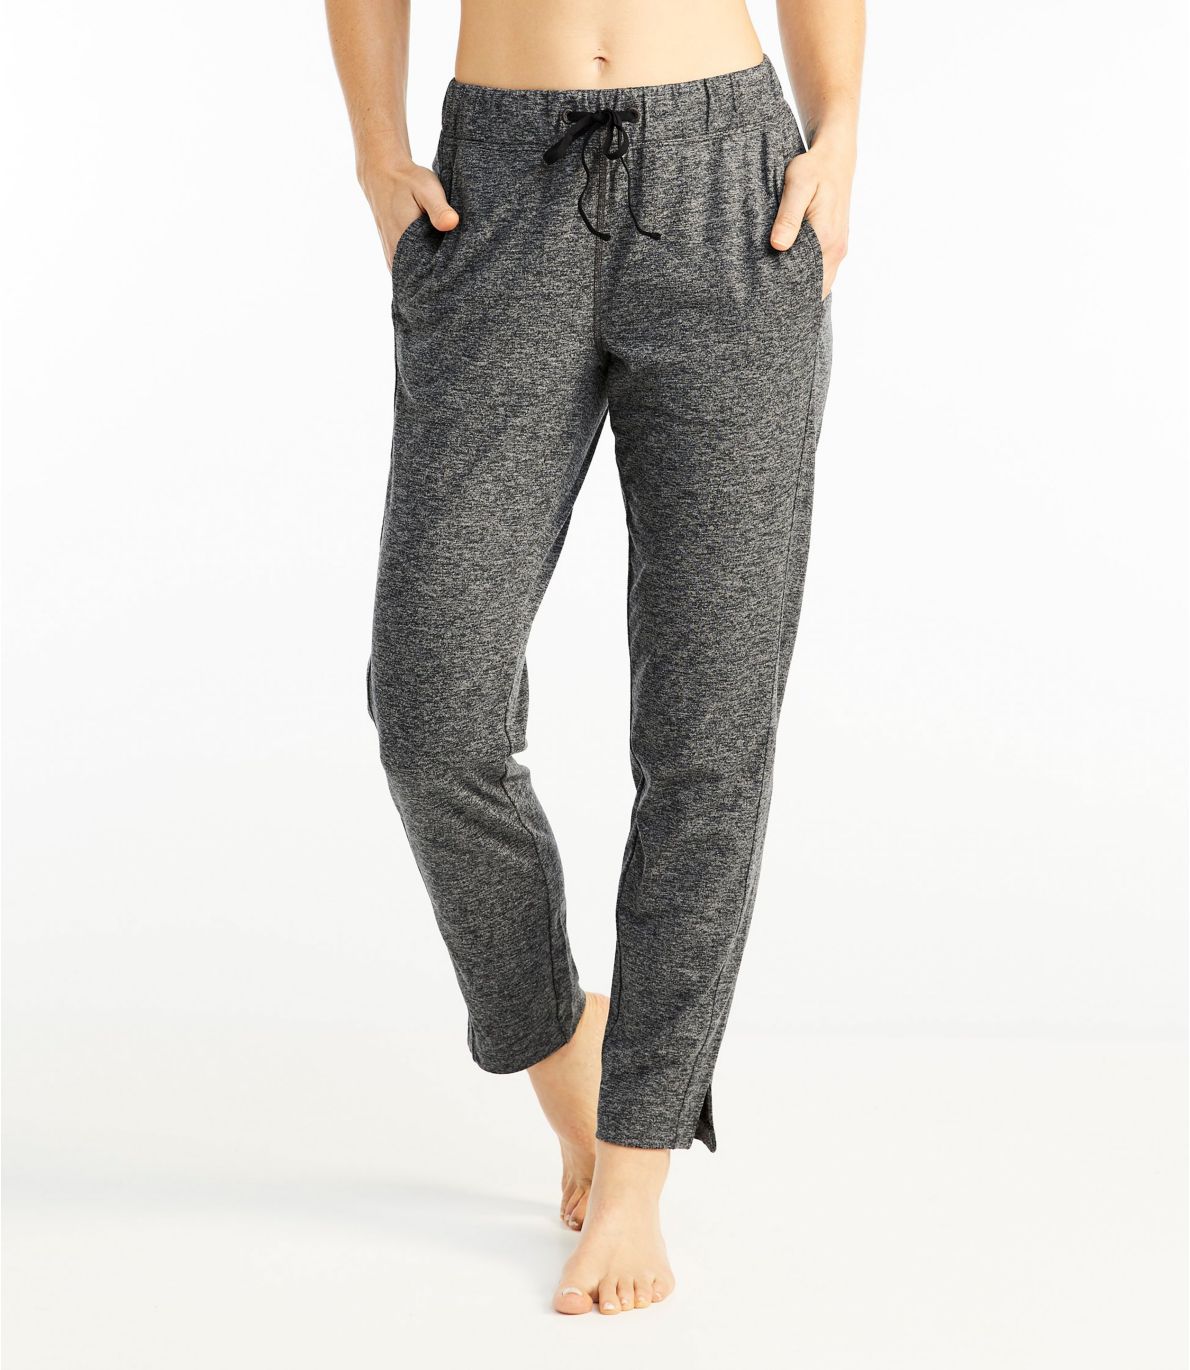 Women's All-Day Active UPF Pants at L.L. Bean